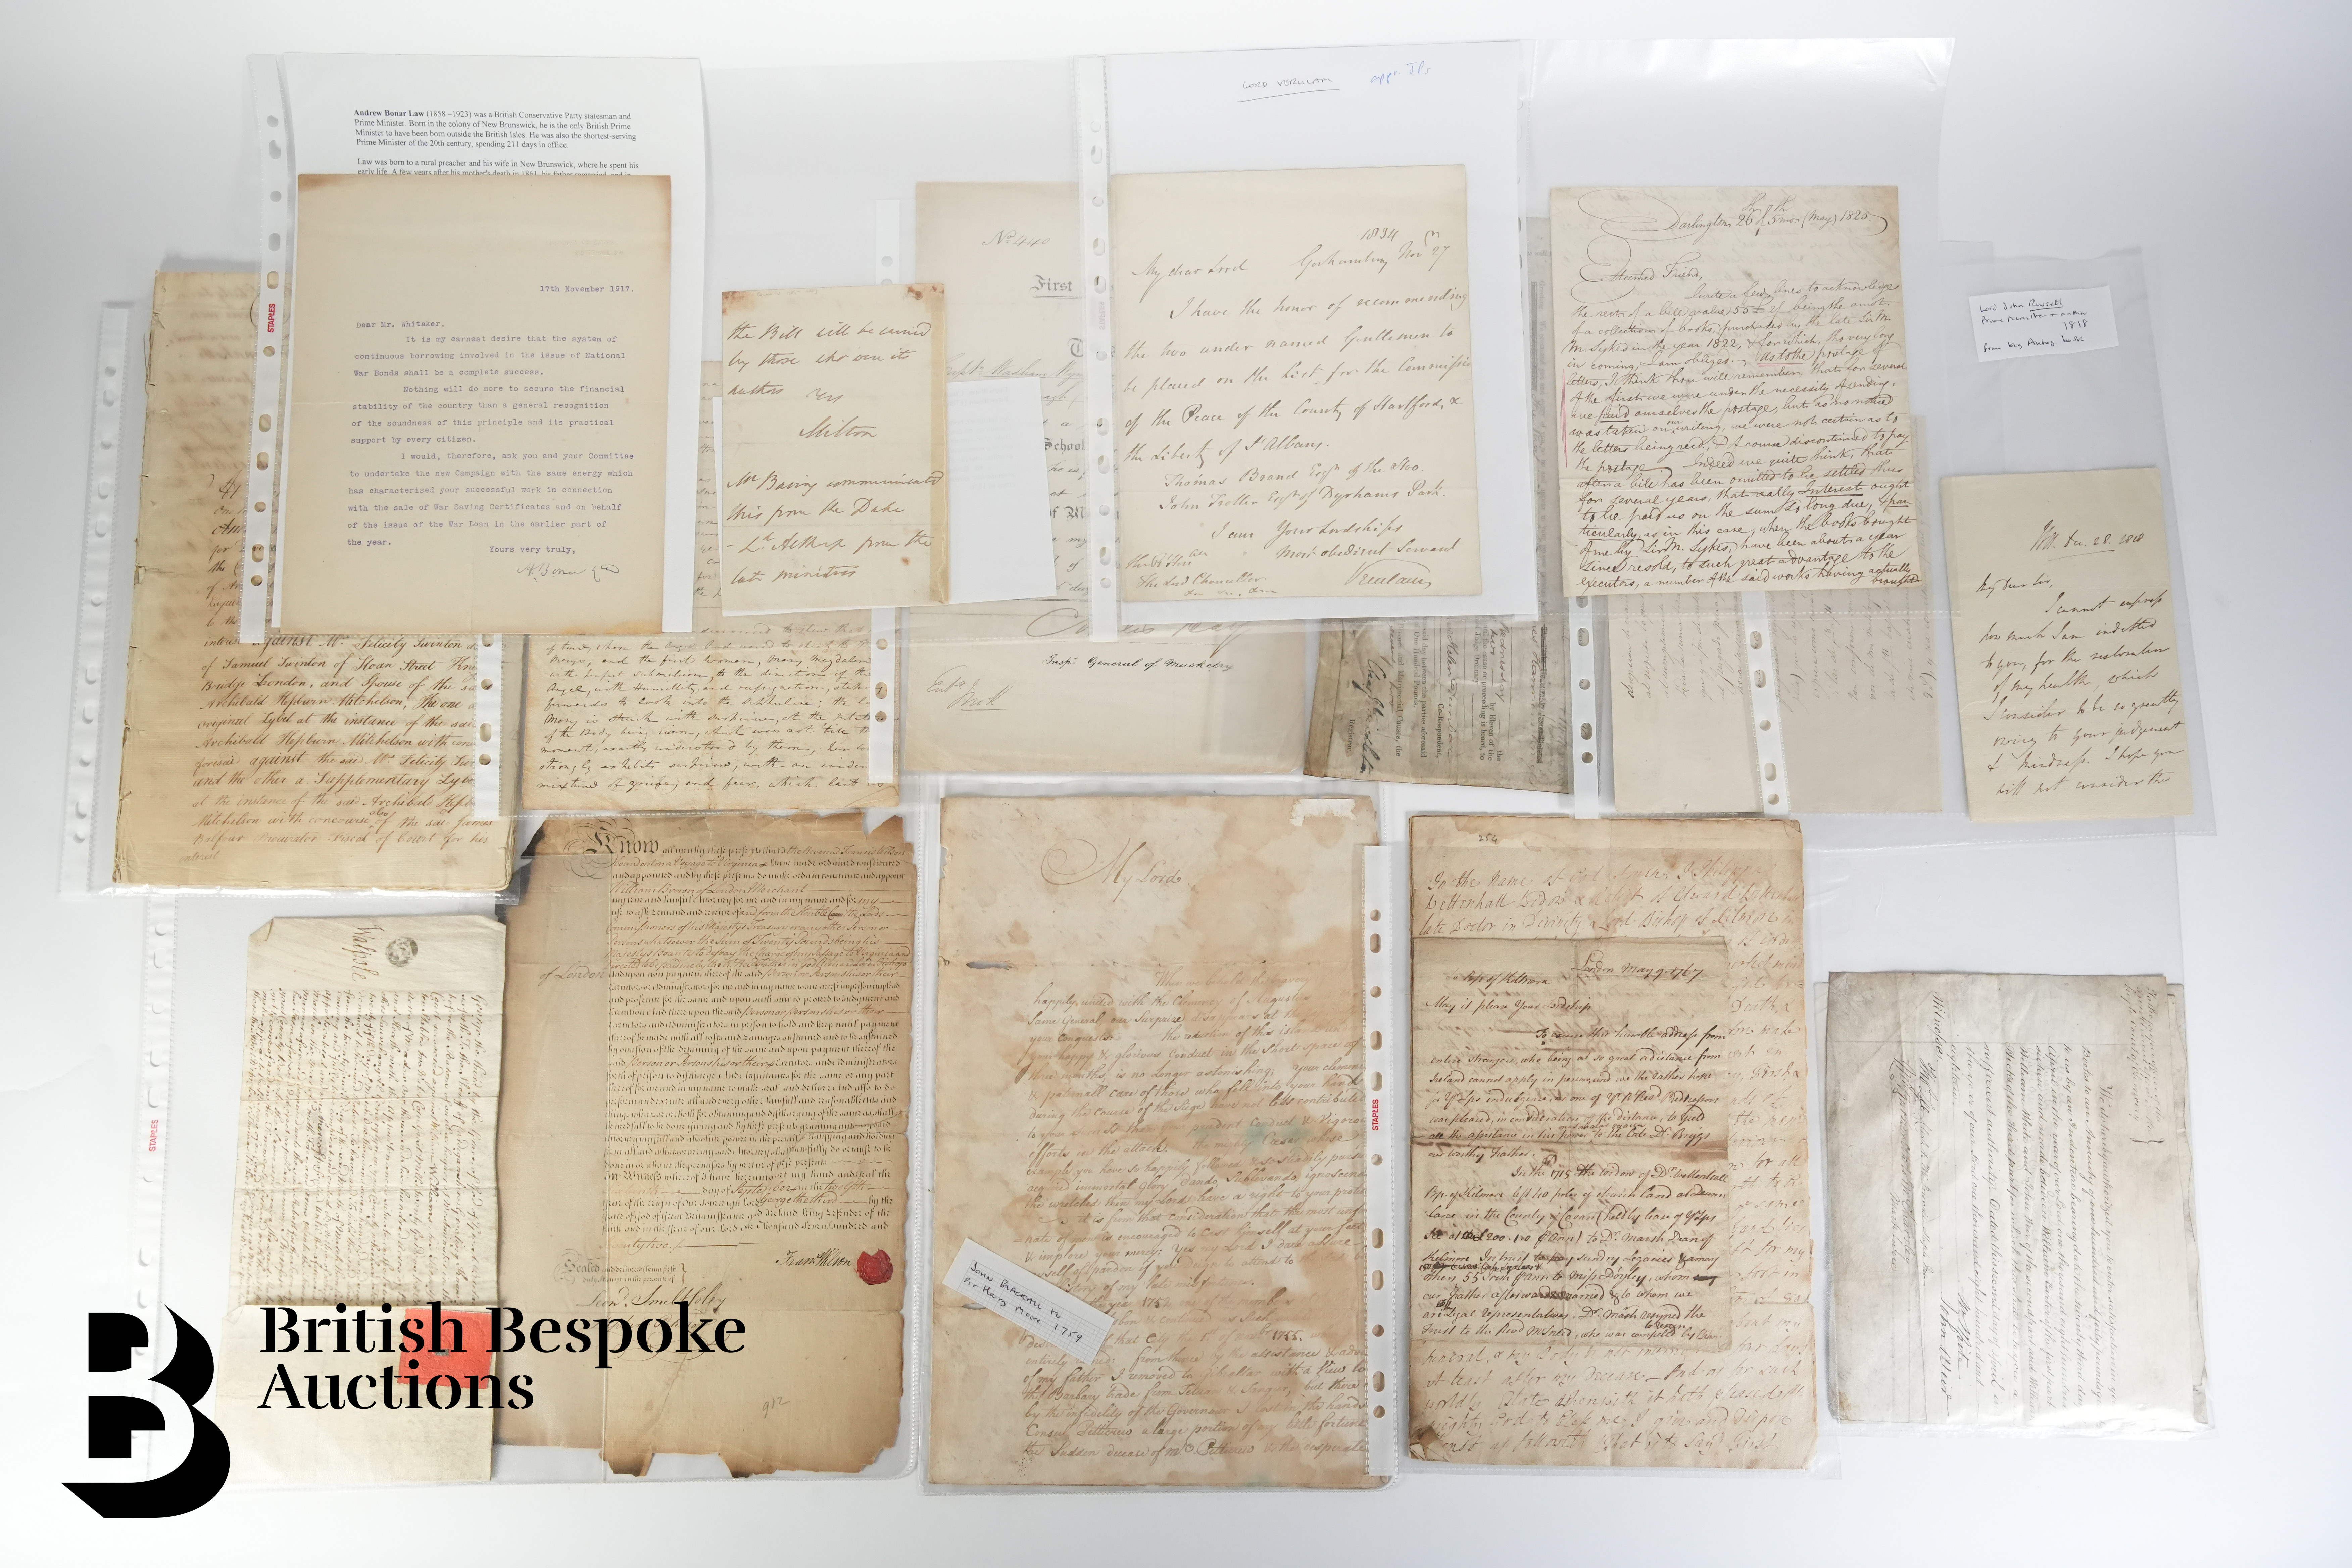 1759-1921 Various Letters and Documents including letters from Lord Russell and Andrew Bonar Law